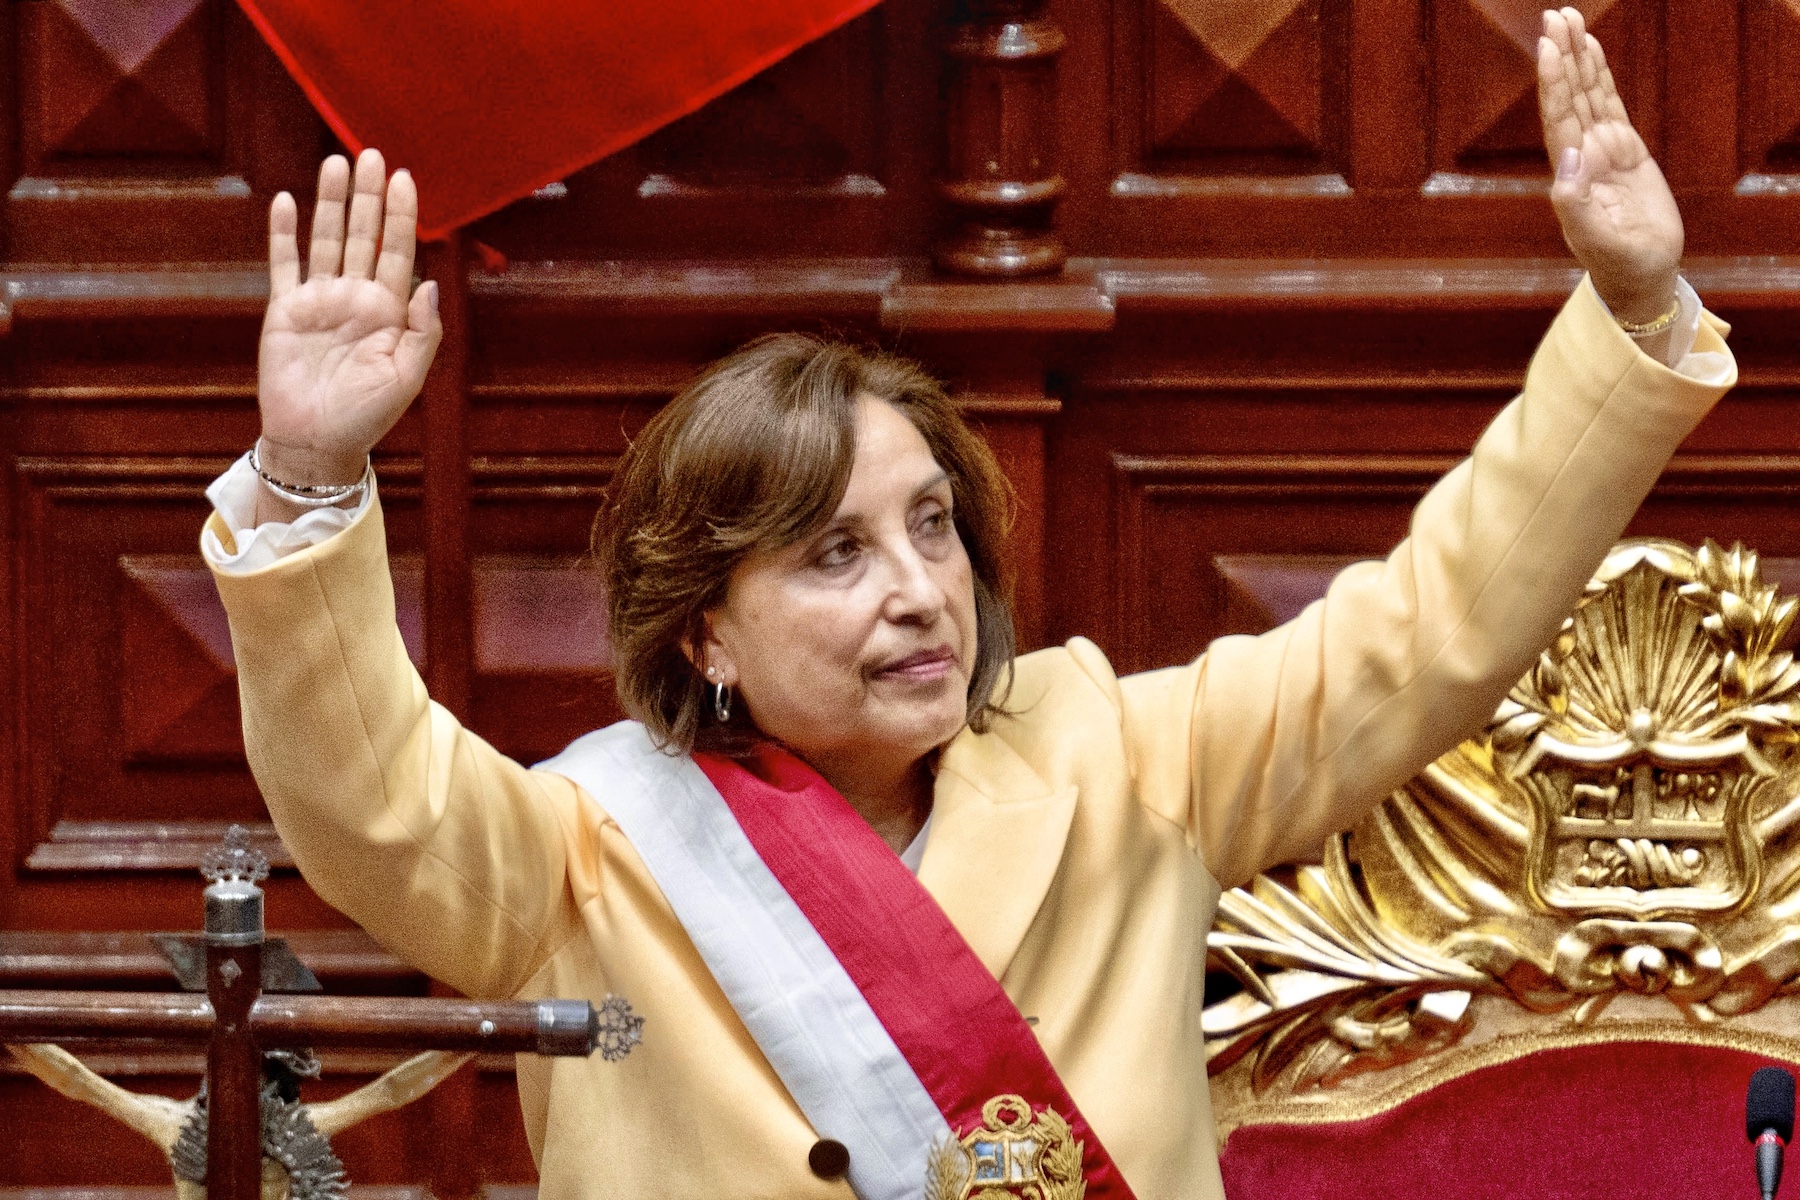 This Leftist Lawyer Has Become Peru’s First Woman President After The Ex- Leader Was Impeached And Arrested